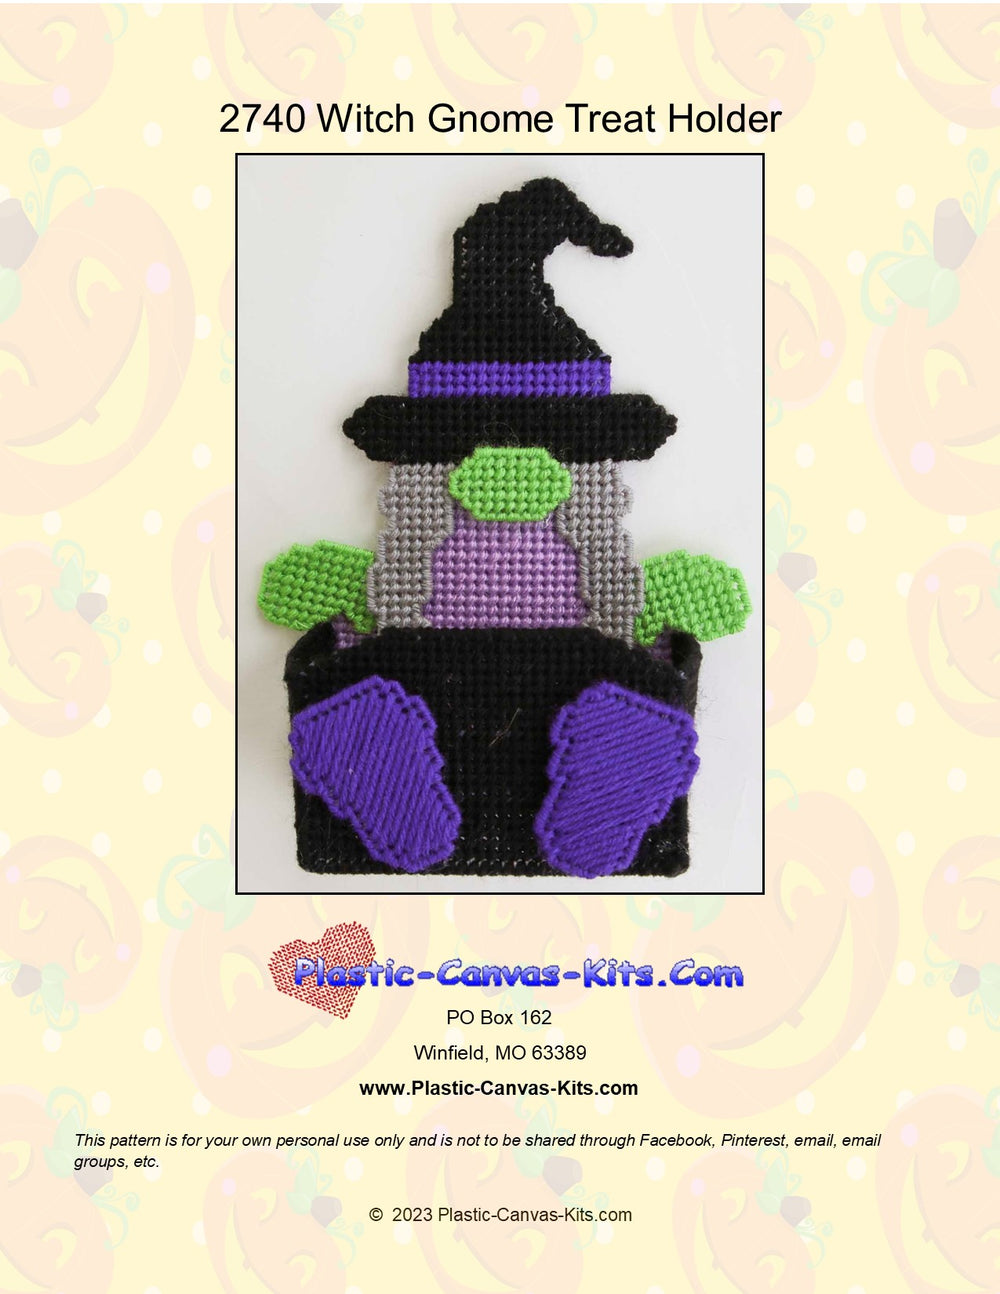 Witch Gnome Treat Holder